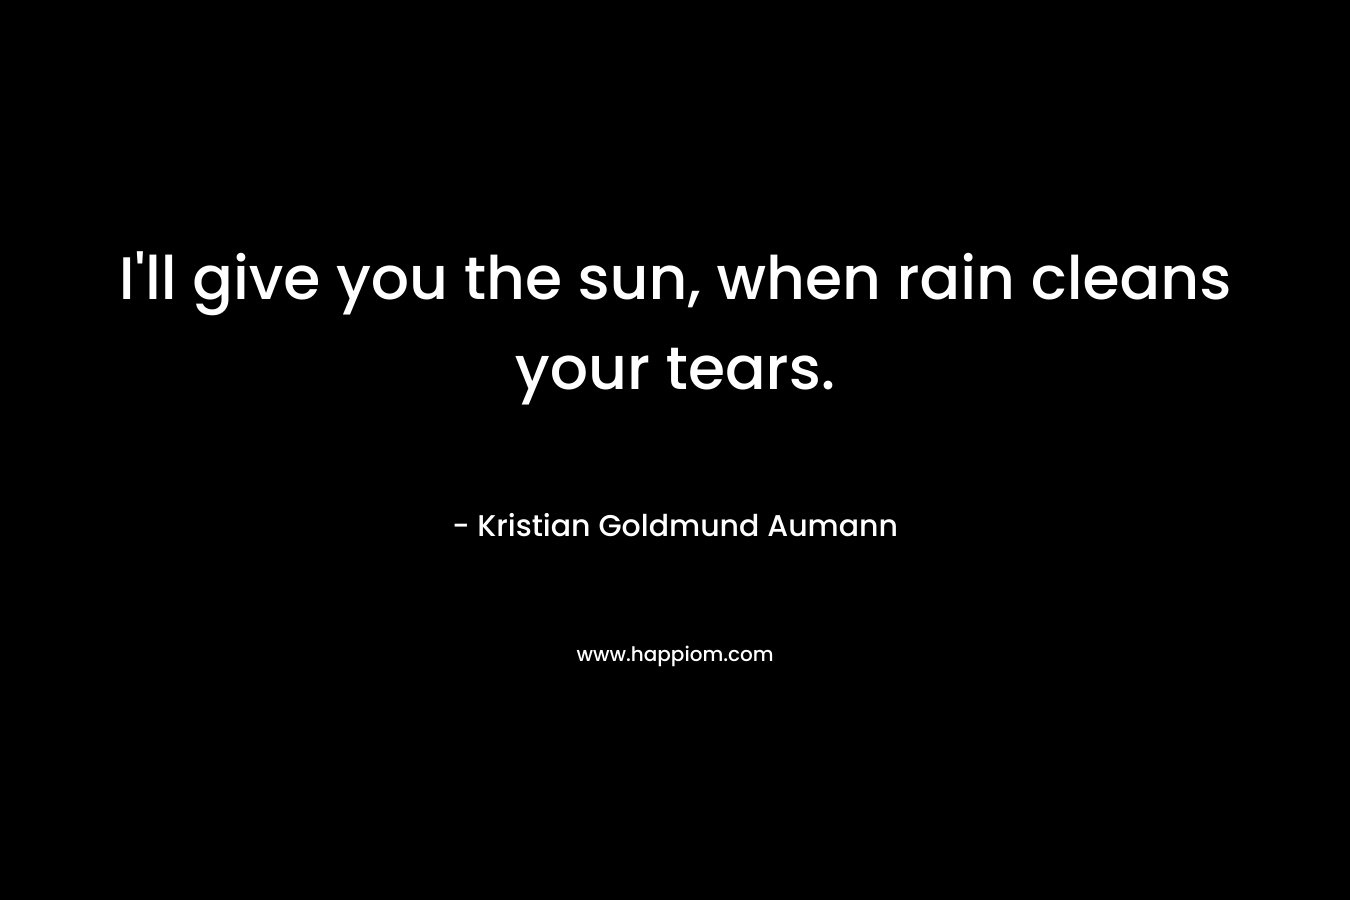 I'll give you the sun, when rain cleans your tears.